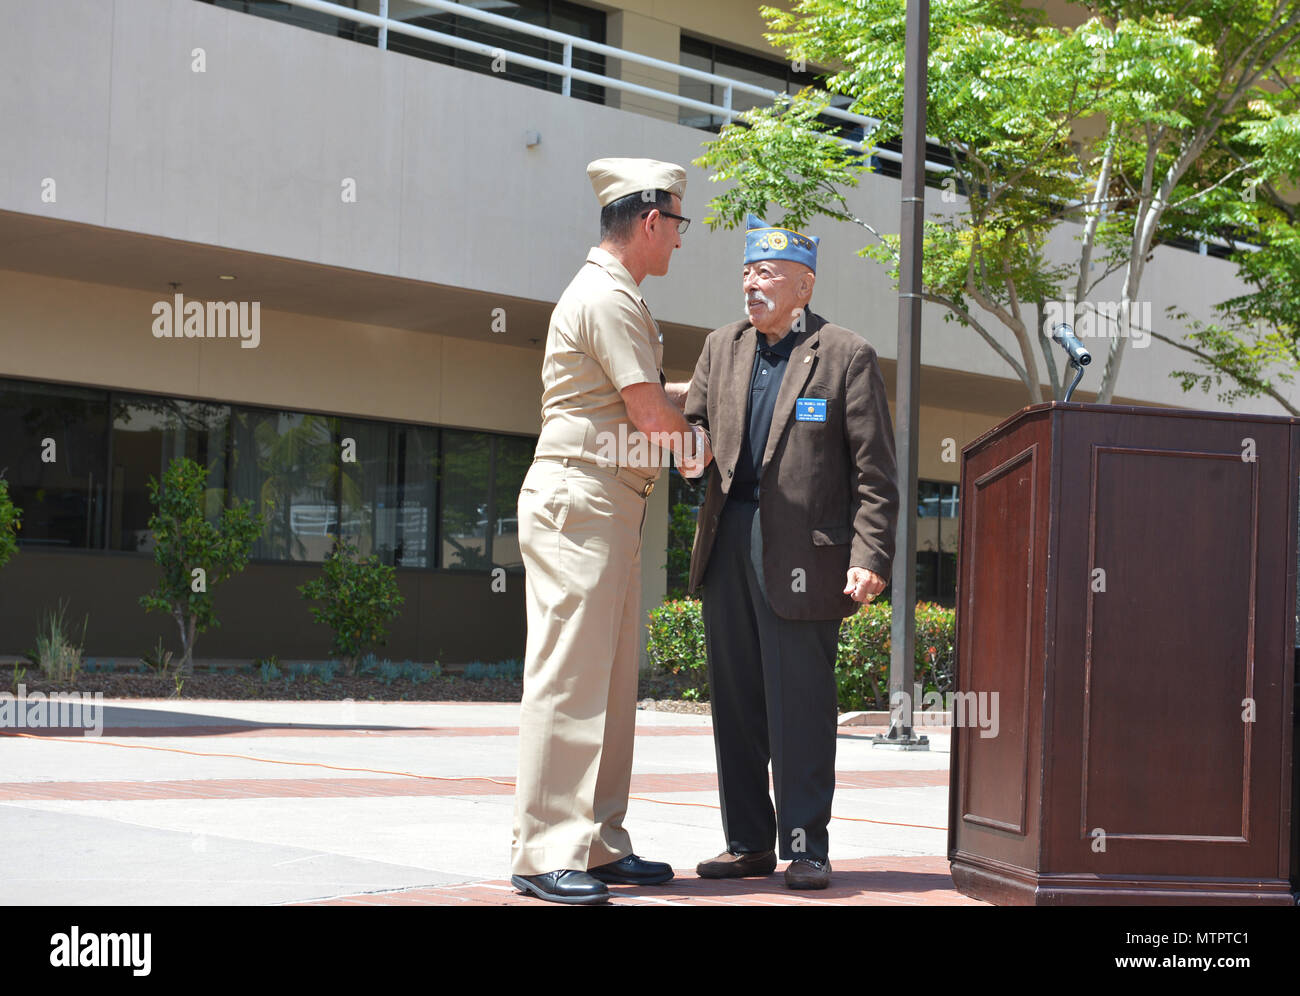 Capt. Joel Roos, commanding officer, Naval Medical Center San Diego (NMCSD), left, presents his command coin at NMCSD to retired Army Col. Maxwell Colon, Past National Commander of the Jewish War Veterans of the USA Foundation.  The Jewish War Veterans Post 385, had just donated various items, such as quilts and clothing, to the Armed Services YMCA, which is located at NMCSD.  The items will ultimately be delivered to the patients who receive their care at NMCSD. Stock Photo